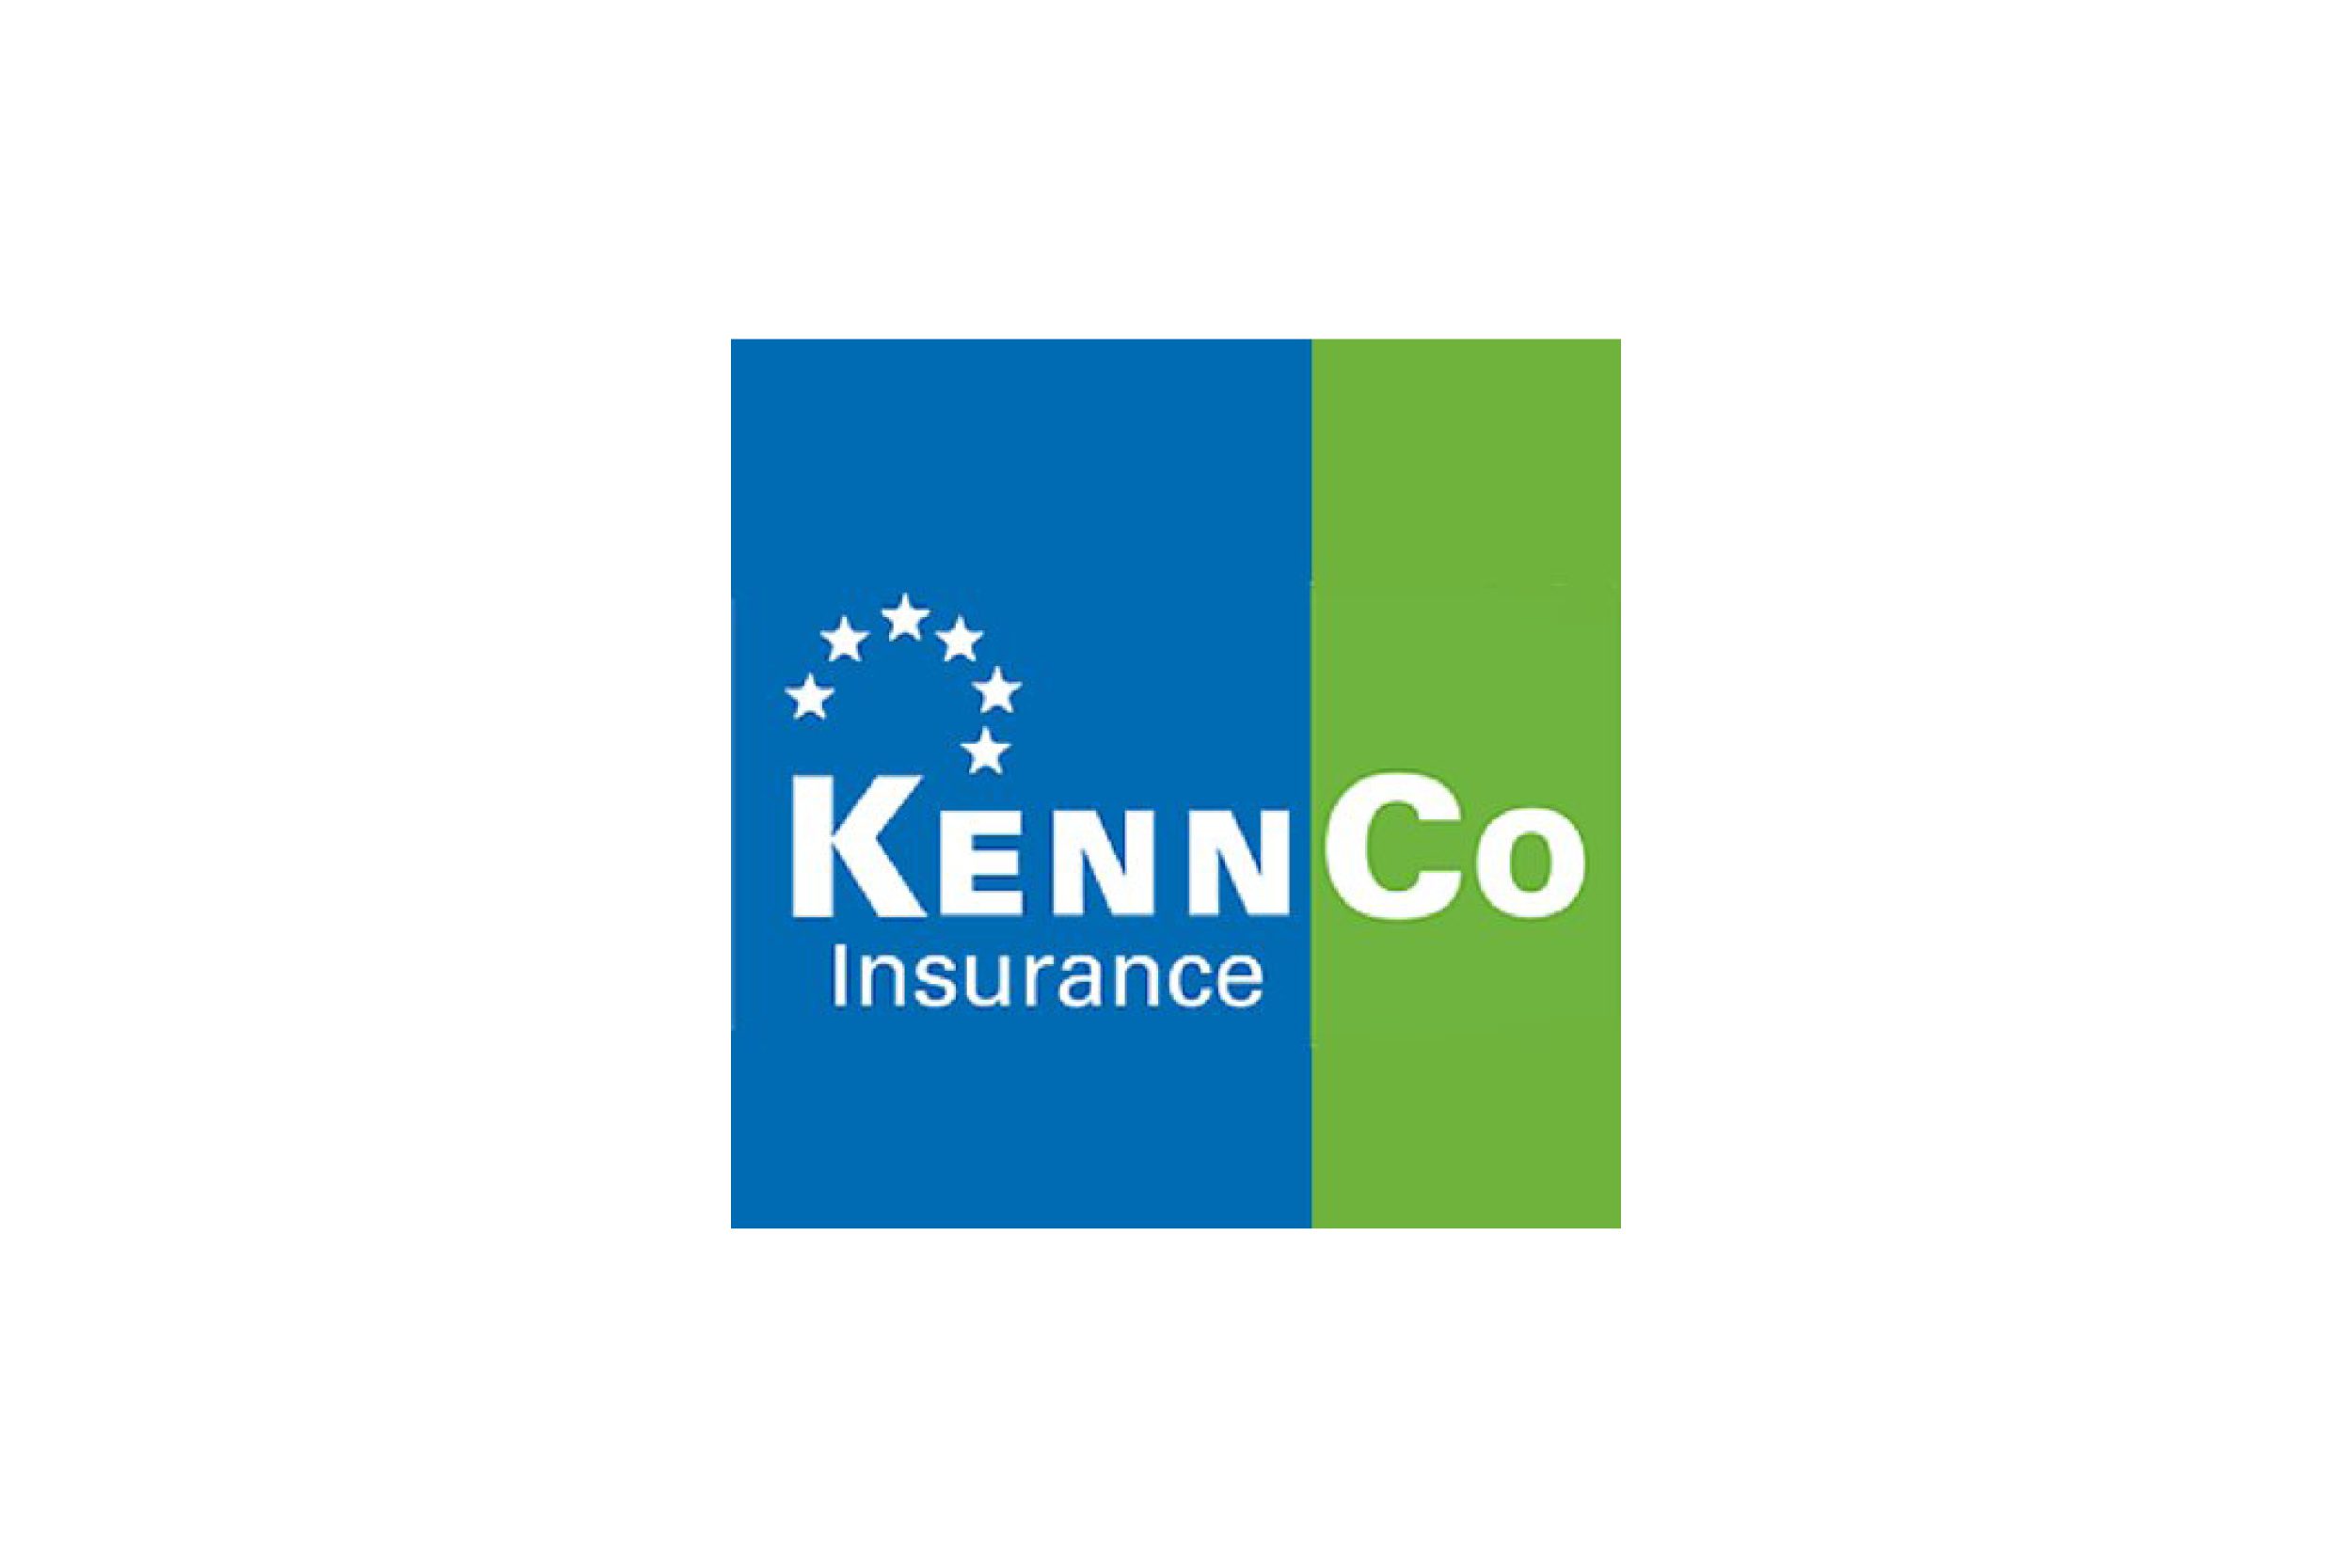 Kennco Insurance - Get The Best Price on Your Policy